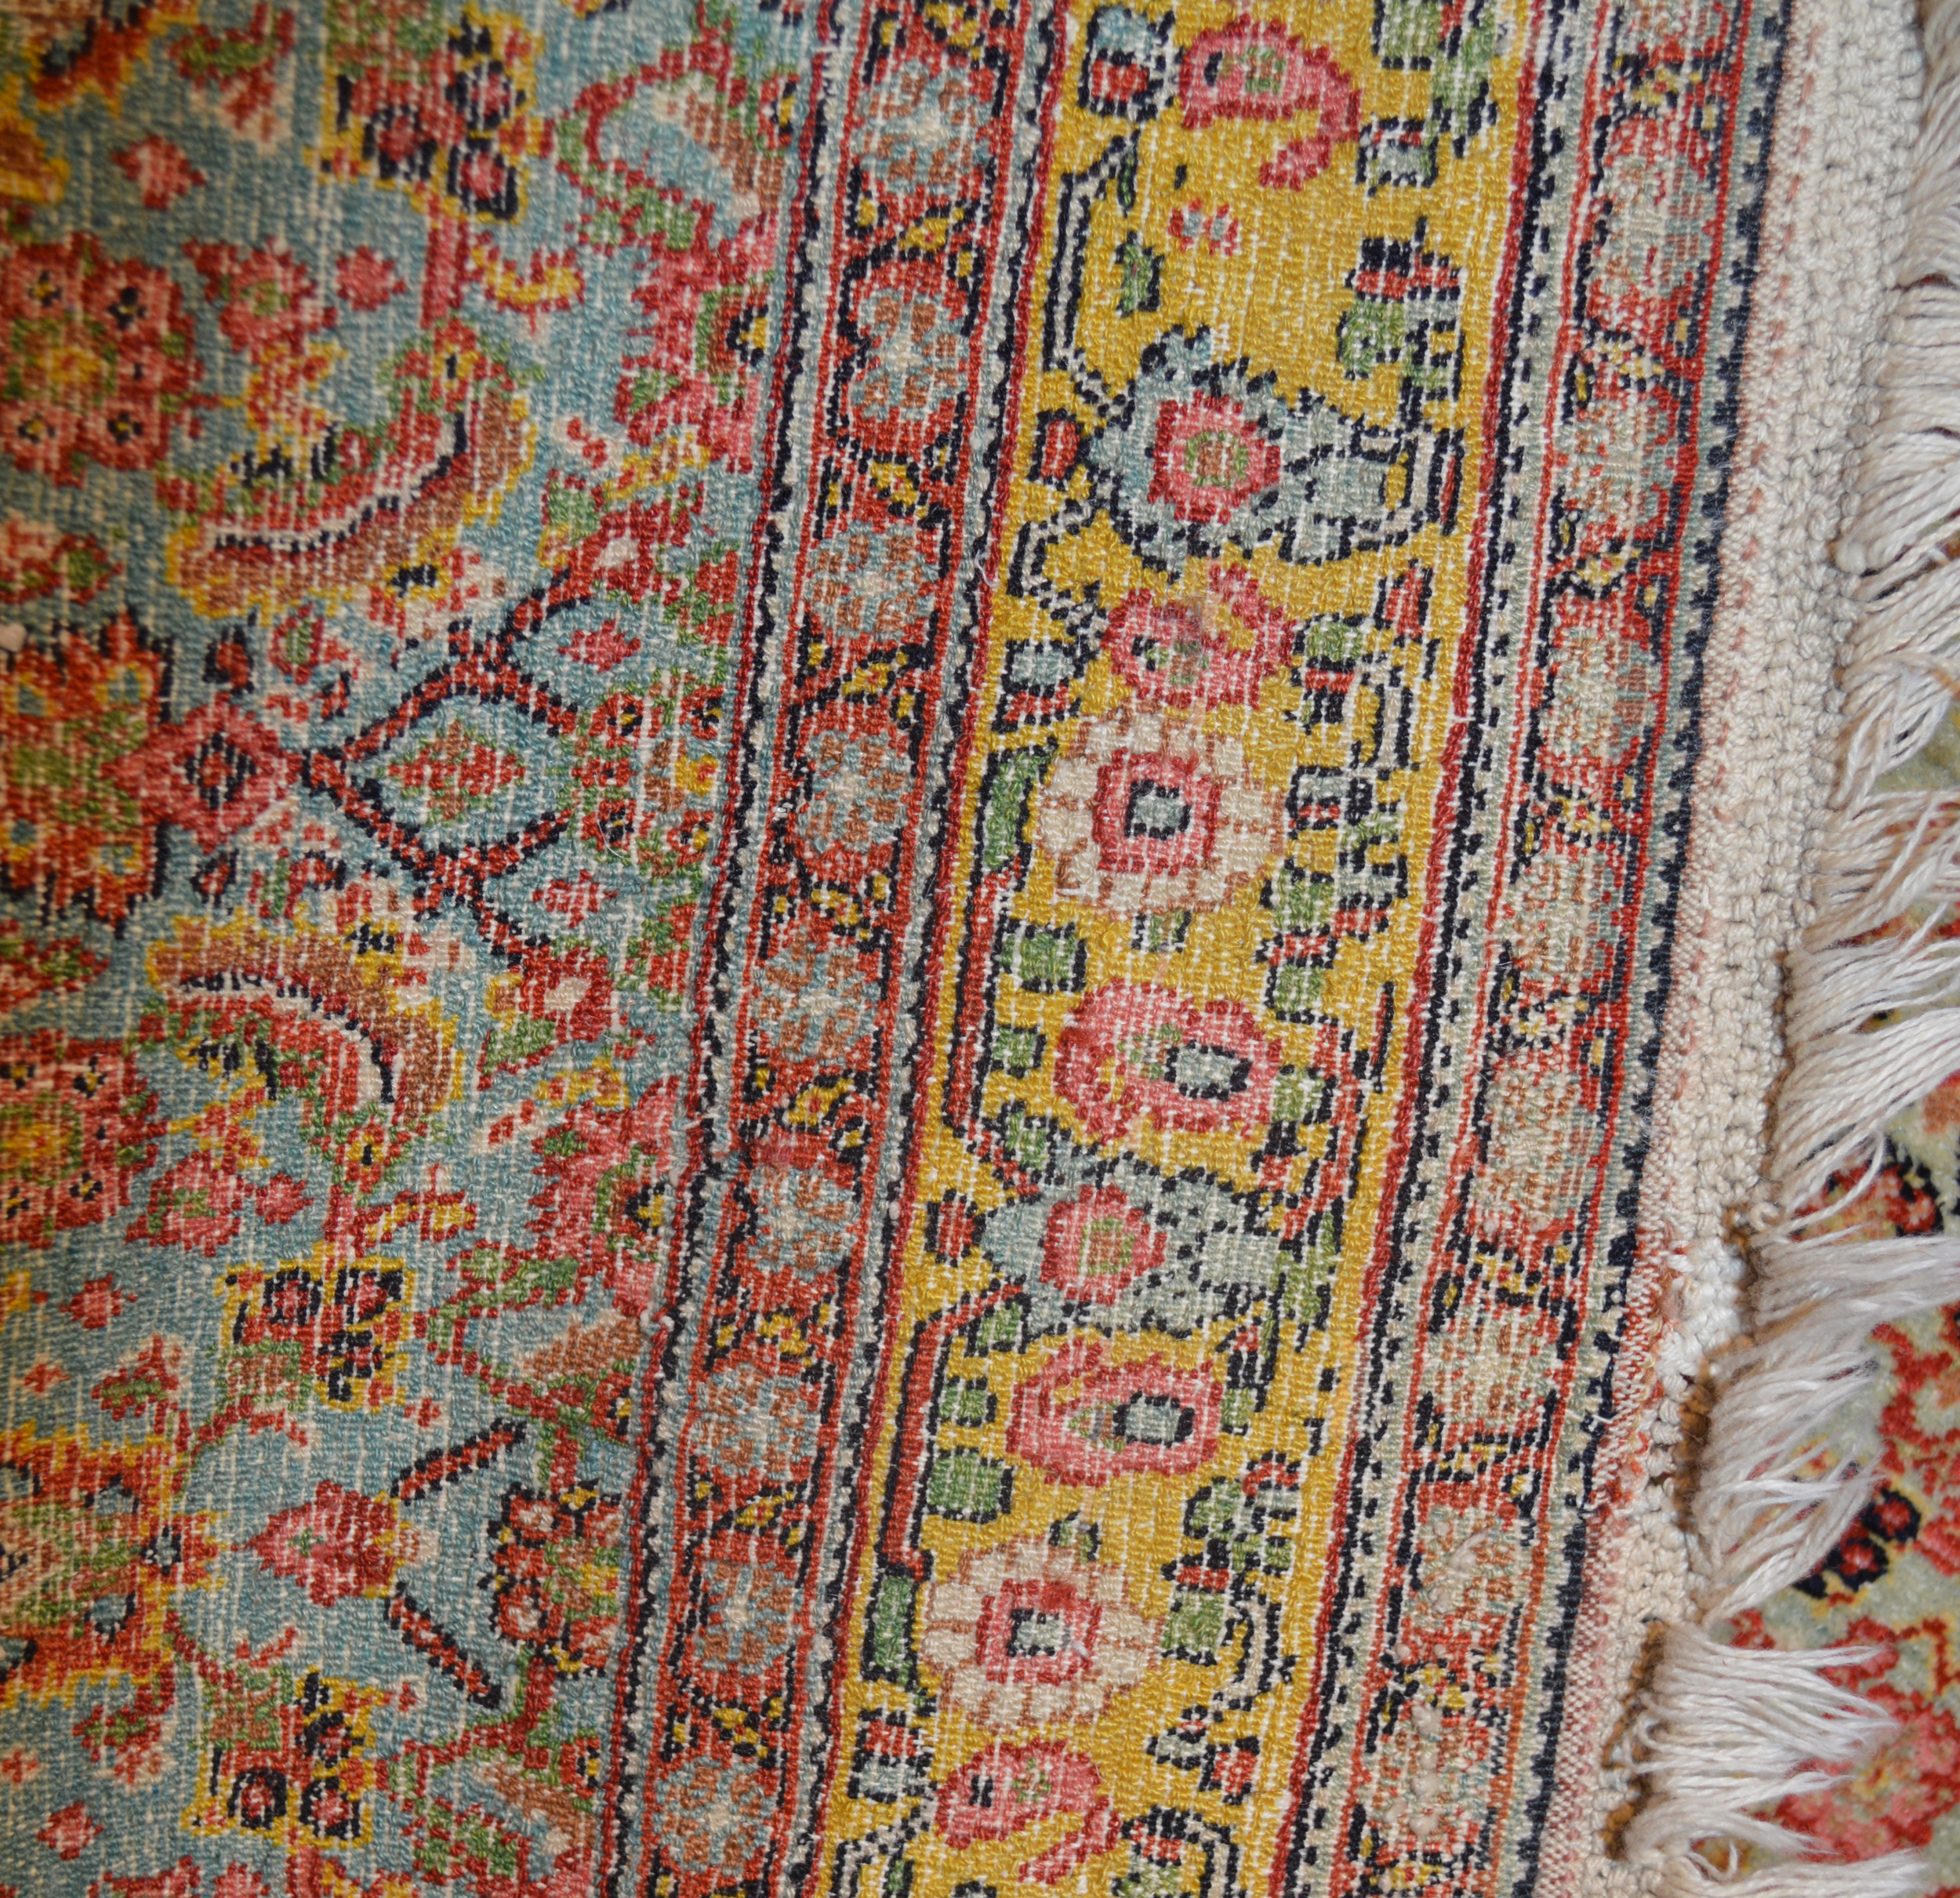 Weave detail of a fine antique Persian Senneh rug with a light blue, Herati design field framed by a yellow border - Douglas Stock Gallery, antique rugs Boston,MA area, New England